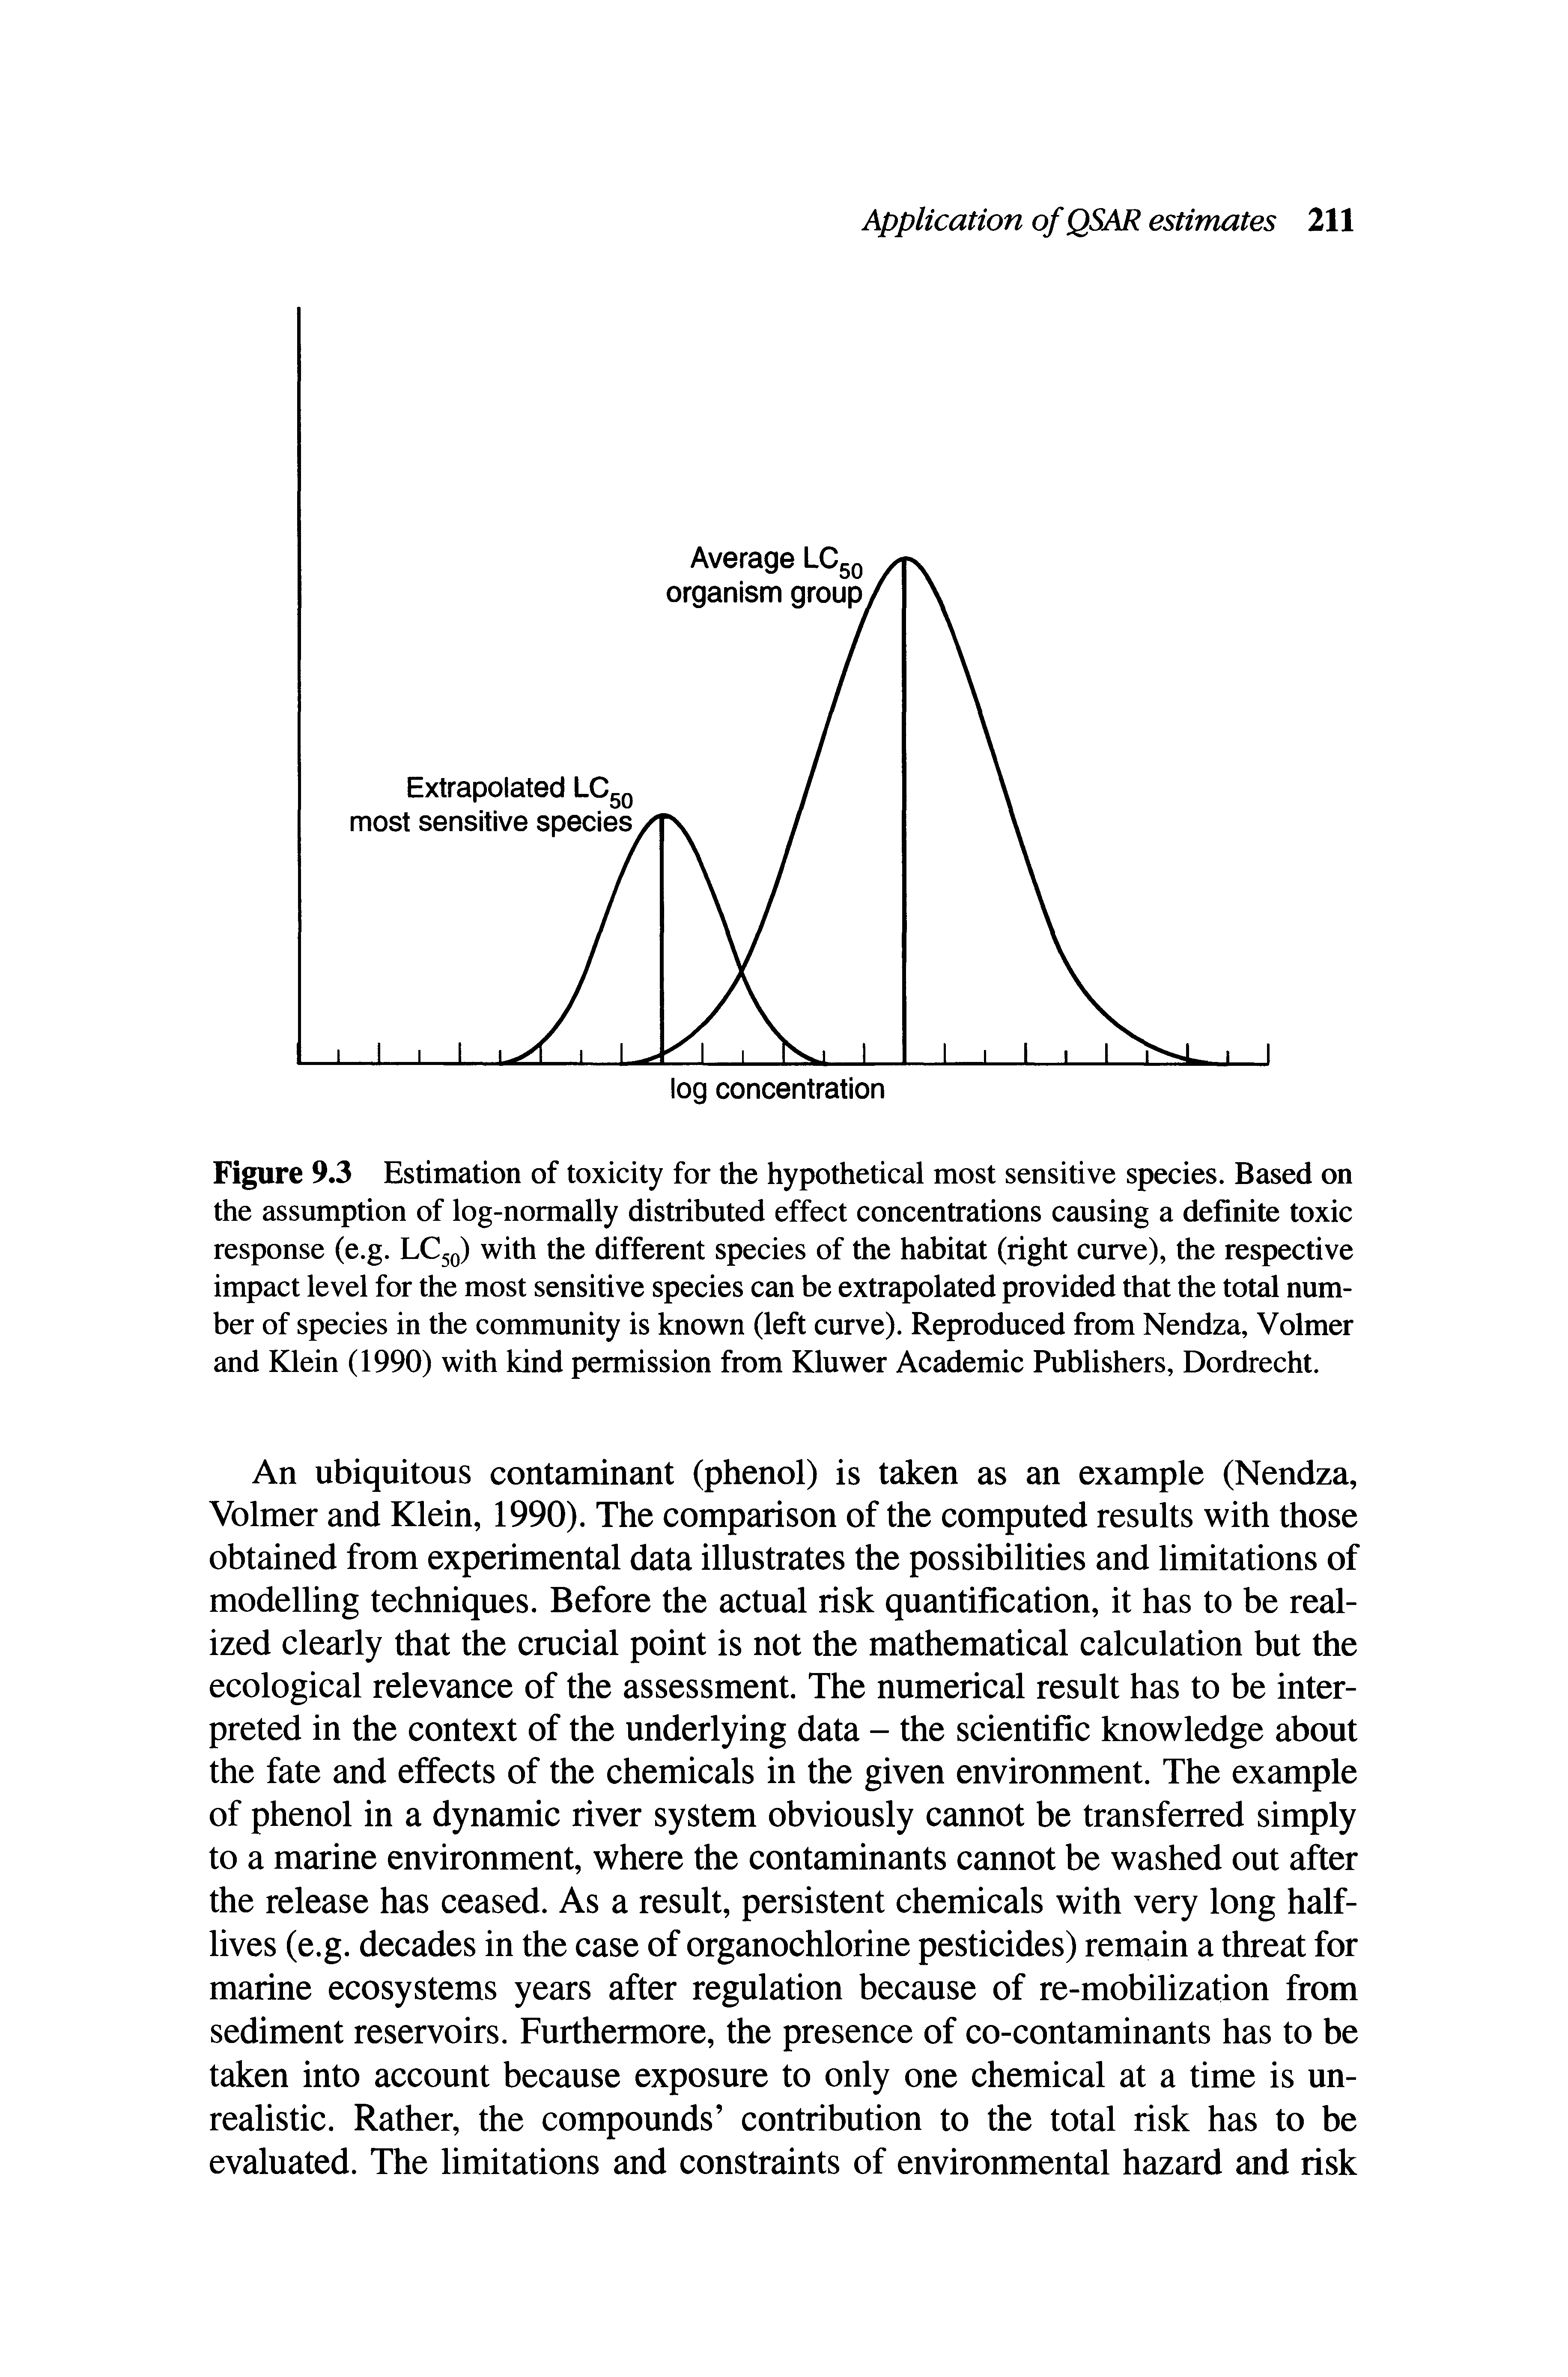 Figure 9.3 Estimation of toxicity for the hypothetical most sensitive species. Based on the assumption of log-normally distributed effect concentrations causing a definite toxic response (e.g. LCgo) with the different species of the habitat (right curve), the respective impact level for the most sensitive species can be extrapolated provided that the total number of species in the community is known (left curve). Reproduced from Nendza, Volmer and Klein (1990) with kind permission from Kluwer Academic Publishers, Dordrecht.